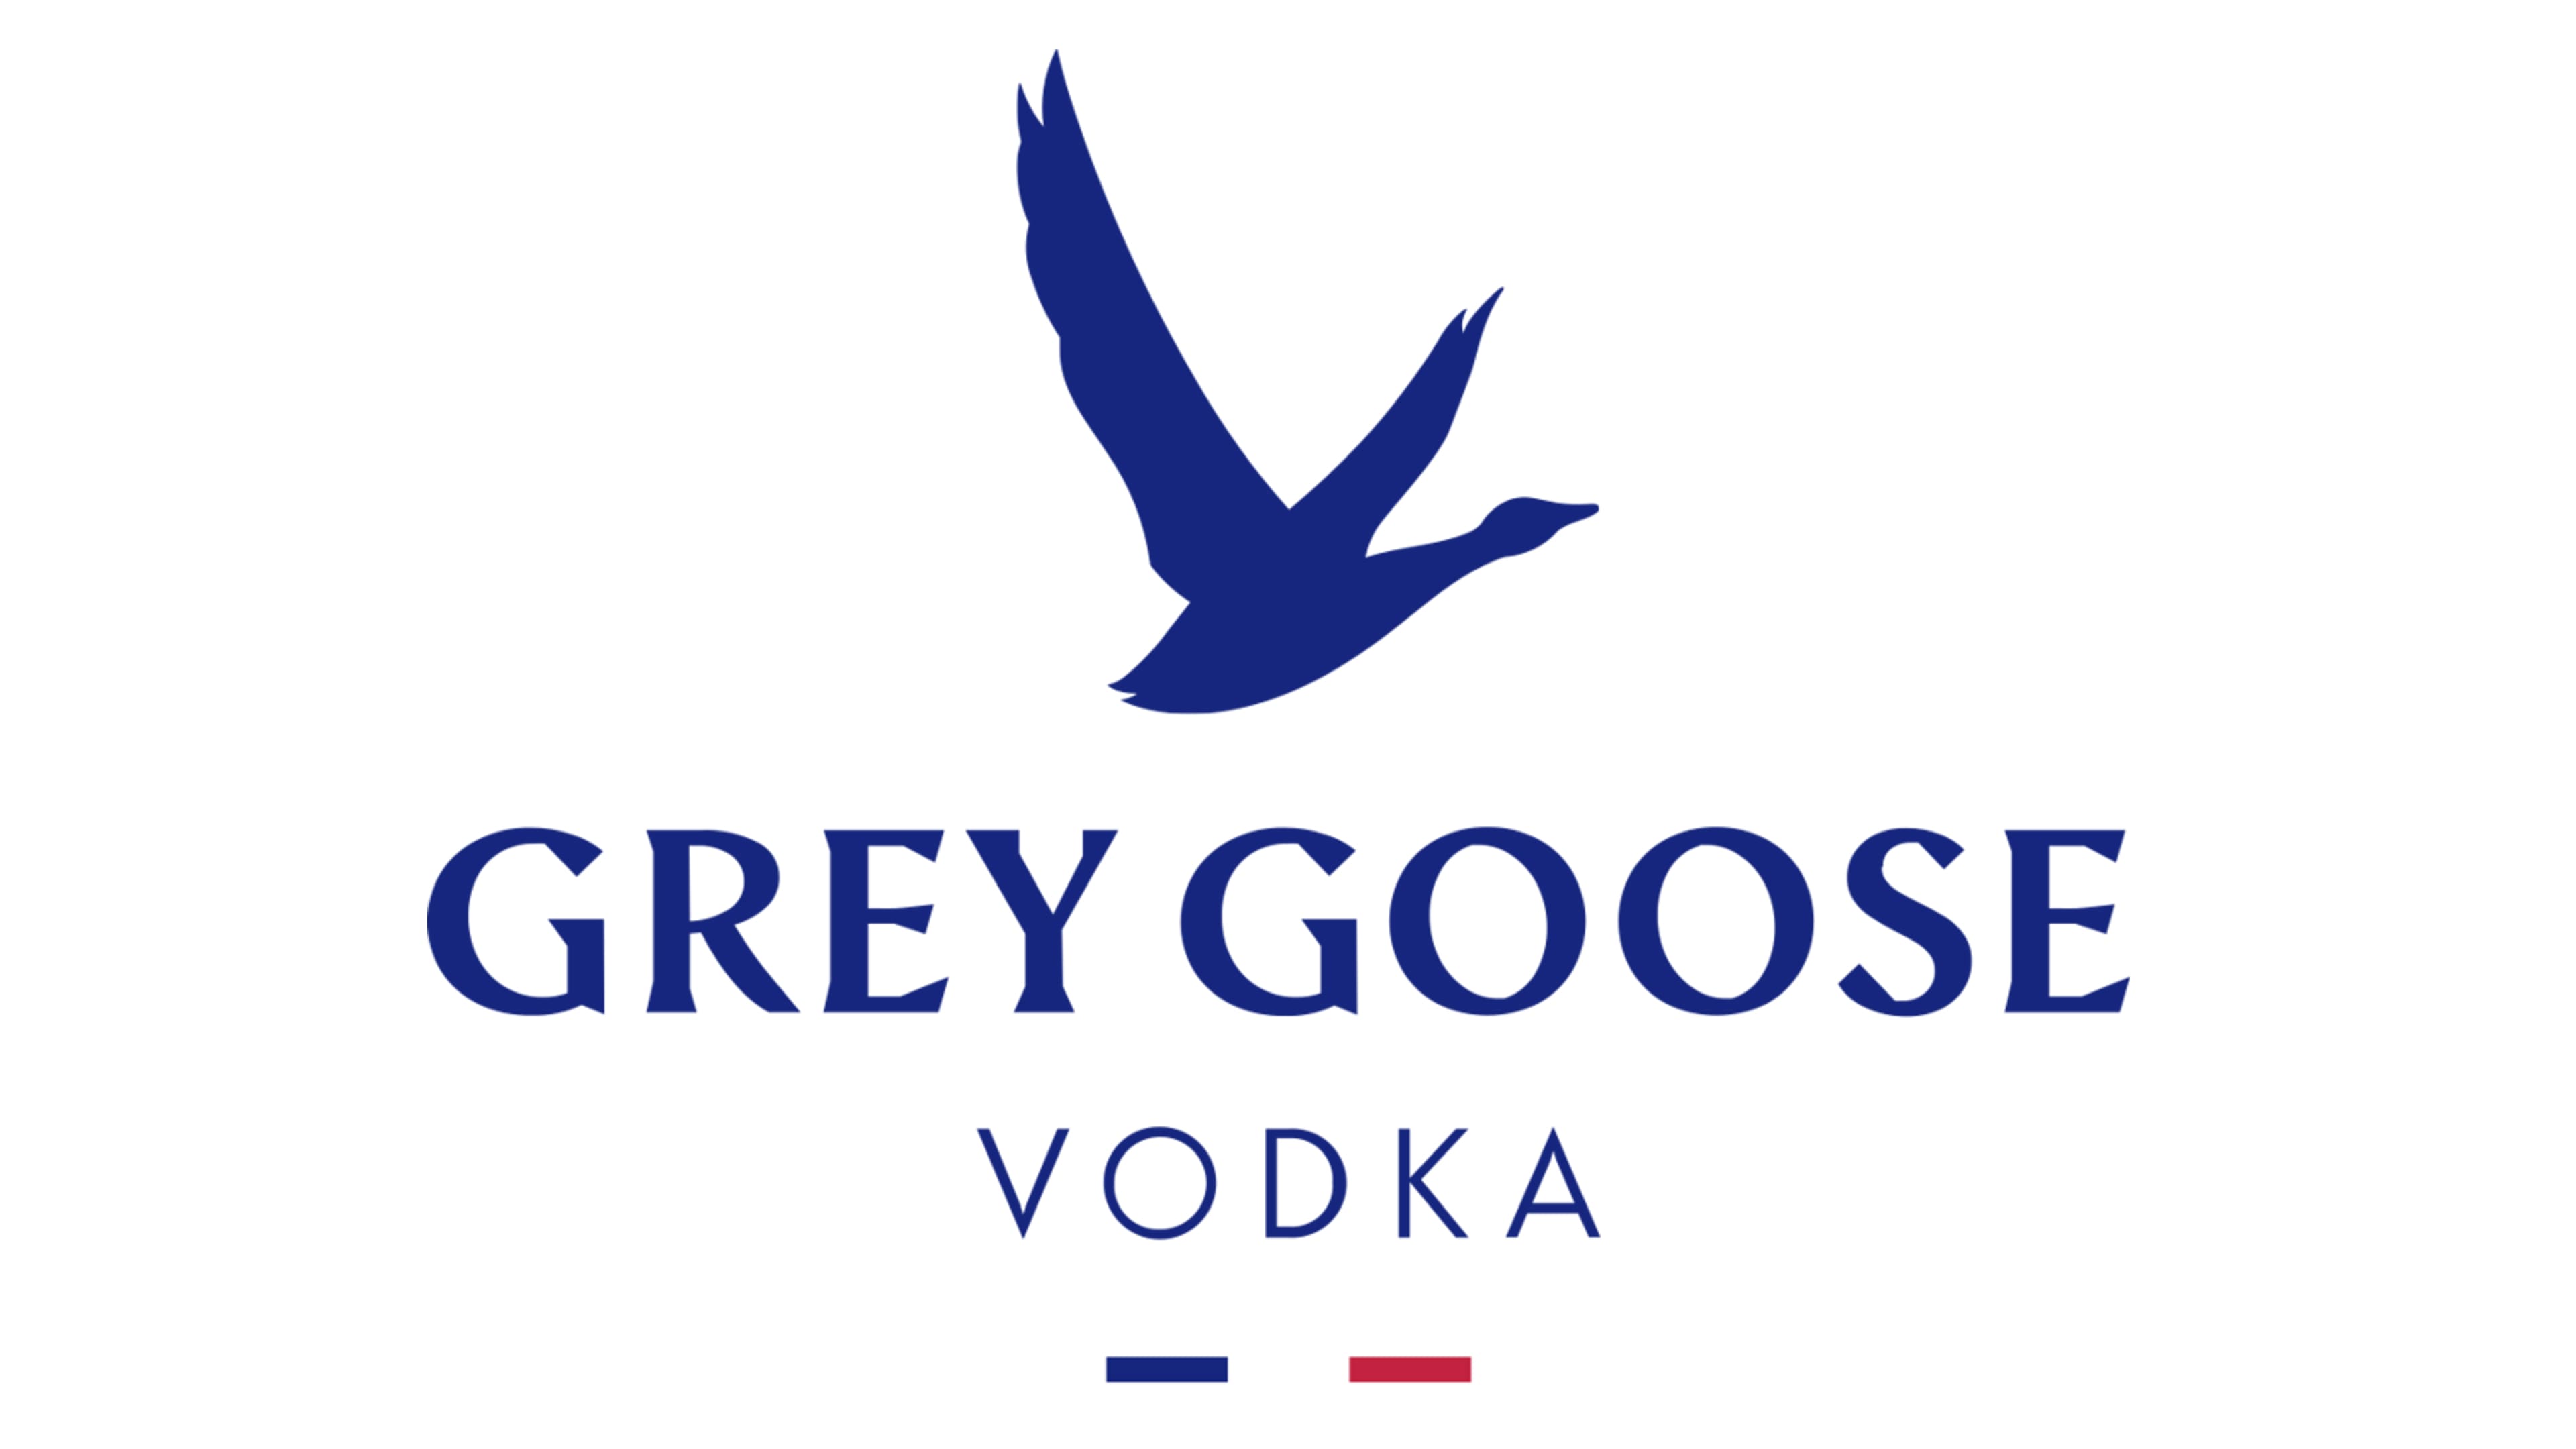 Grey Goose Logos – Image Projection